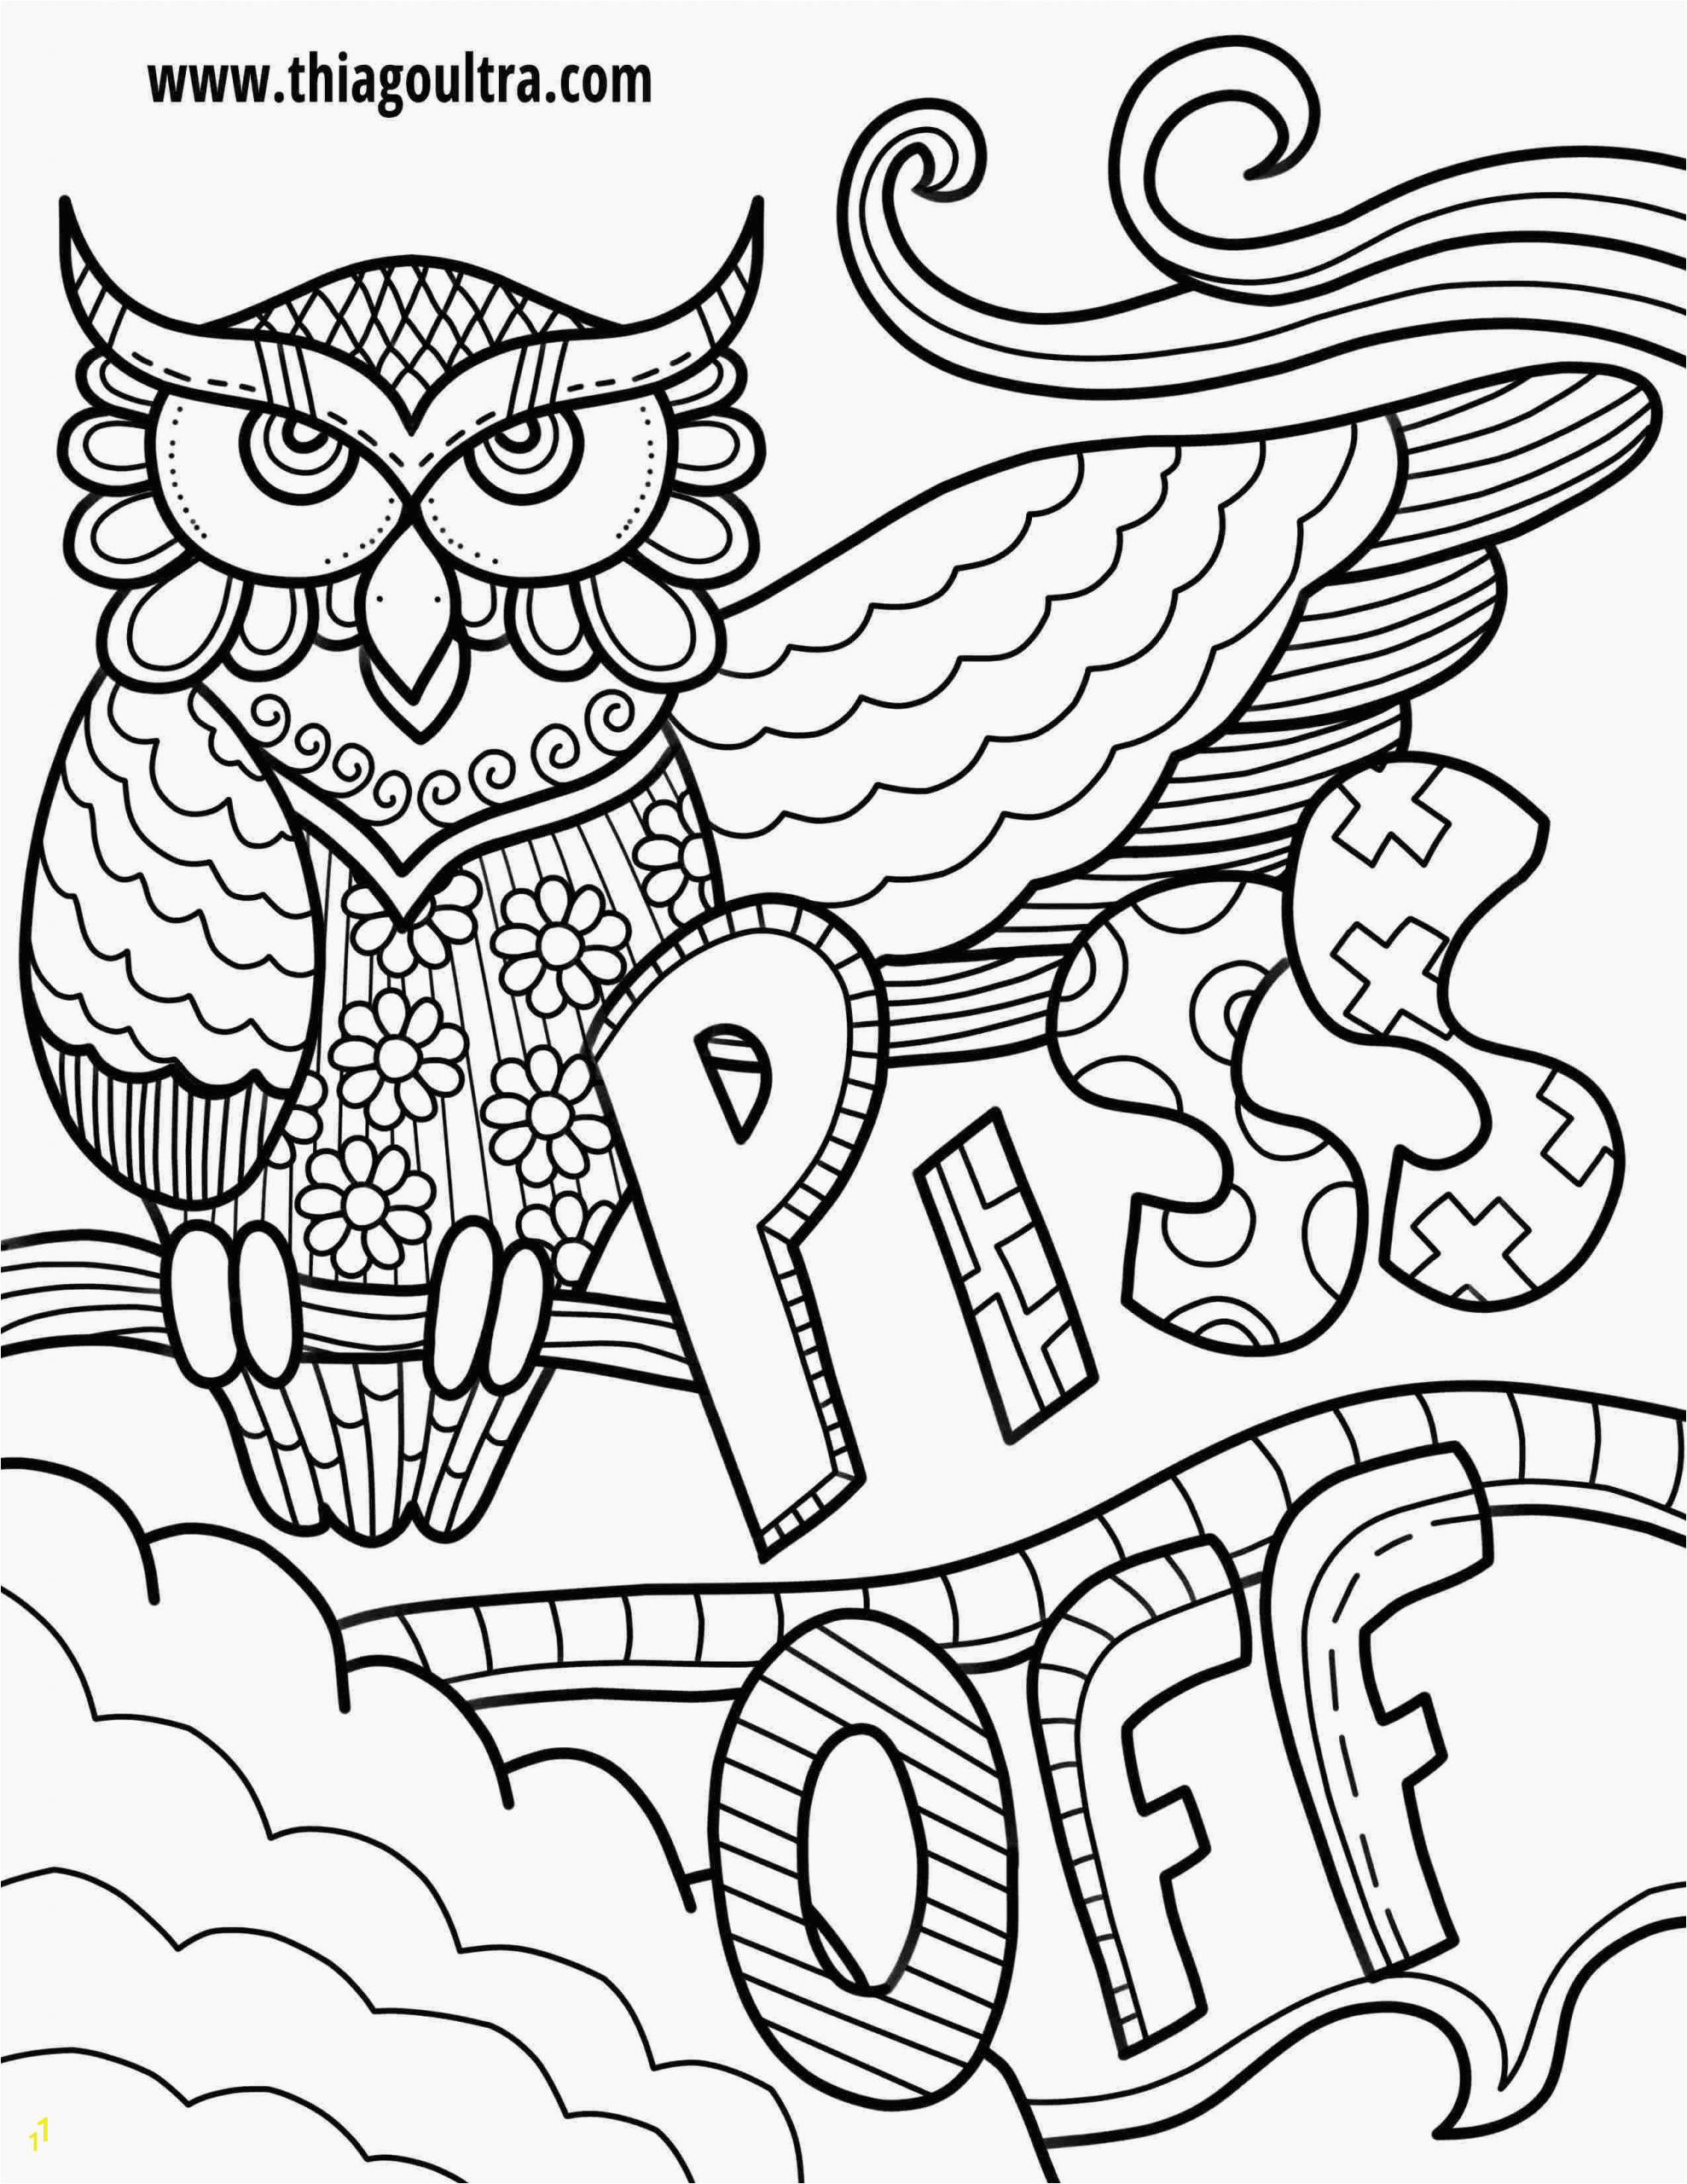 Free Printable Coloring Book Pages for Adults Swear Words Free Printable Coloring Pages for Adults Ly Swear Words